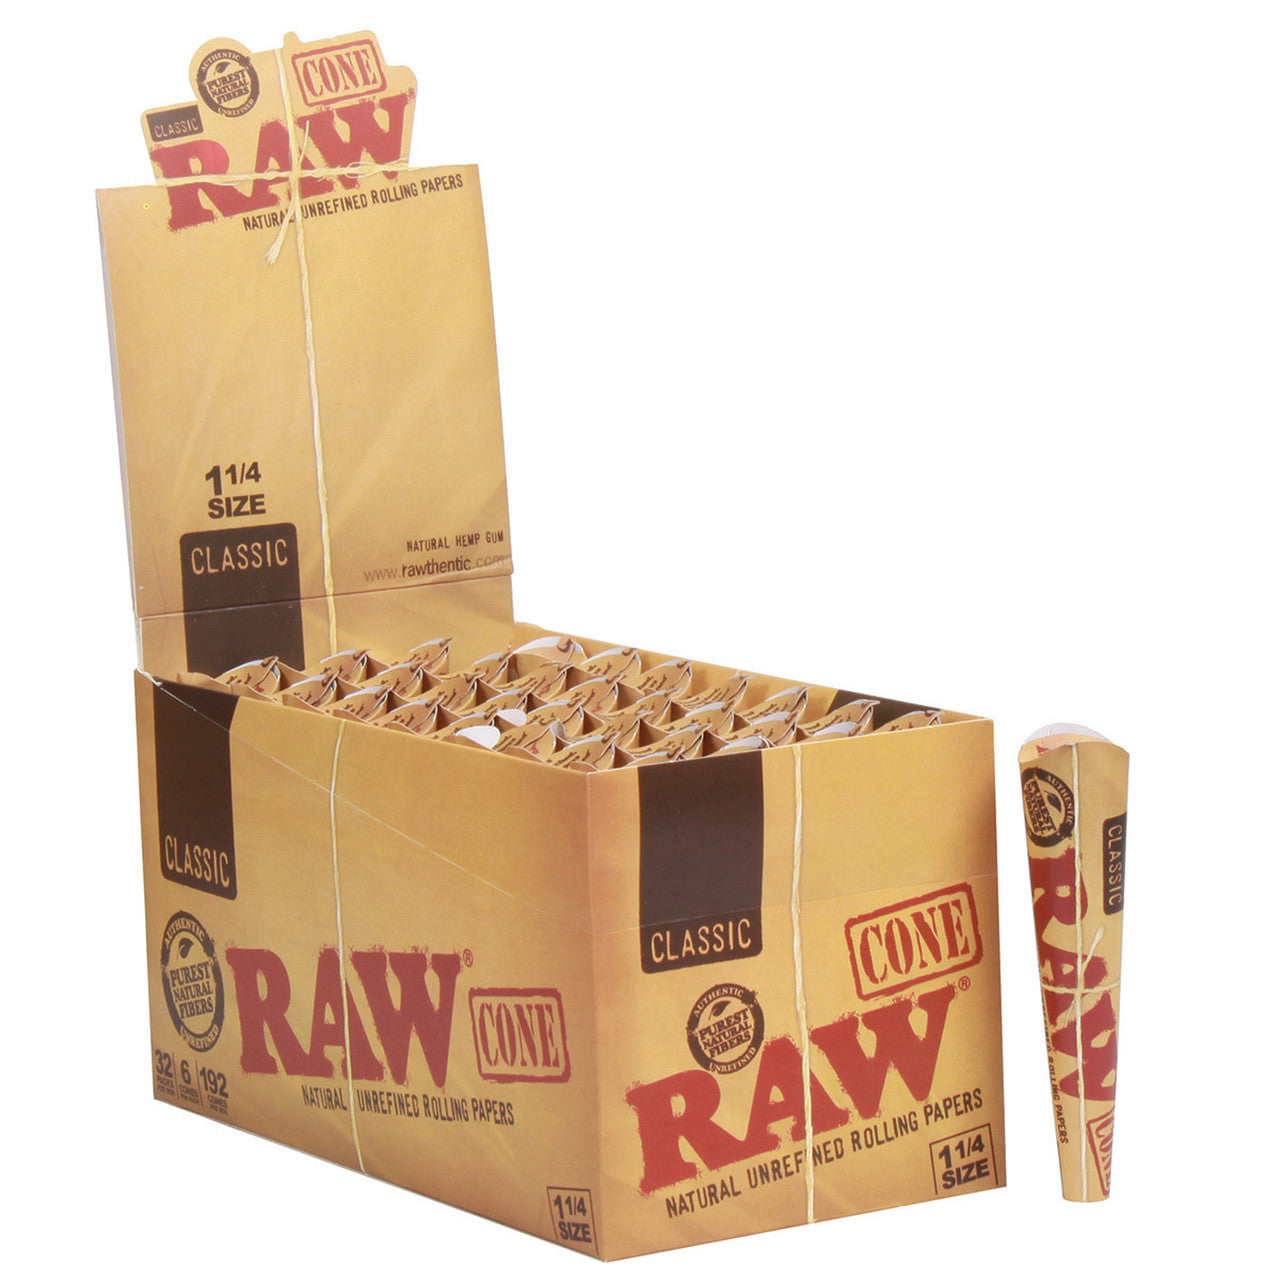 Raw - Classic 1 ¼ 6 pack Cones -32CT Display